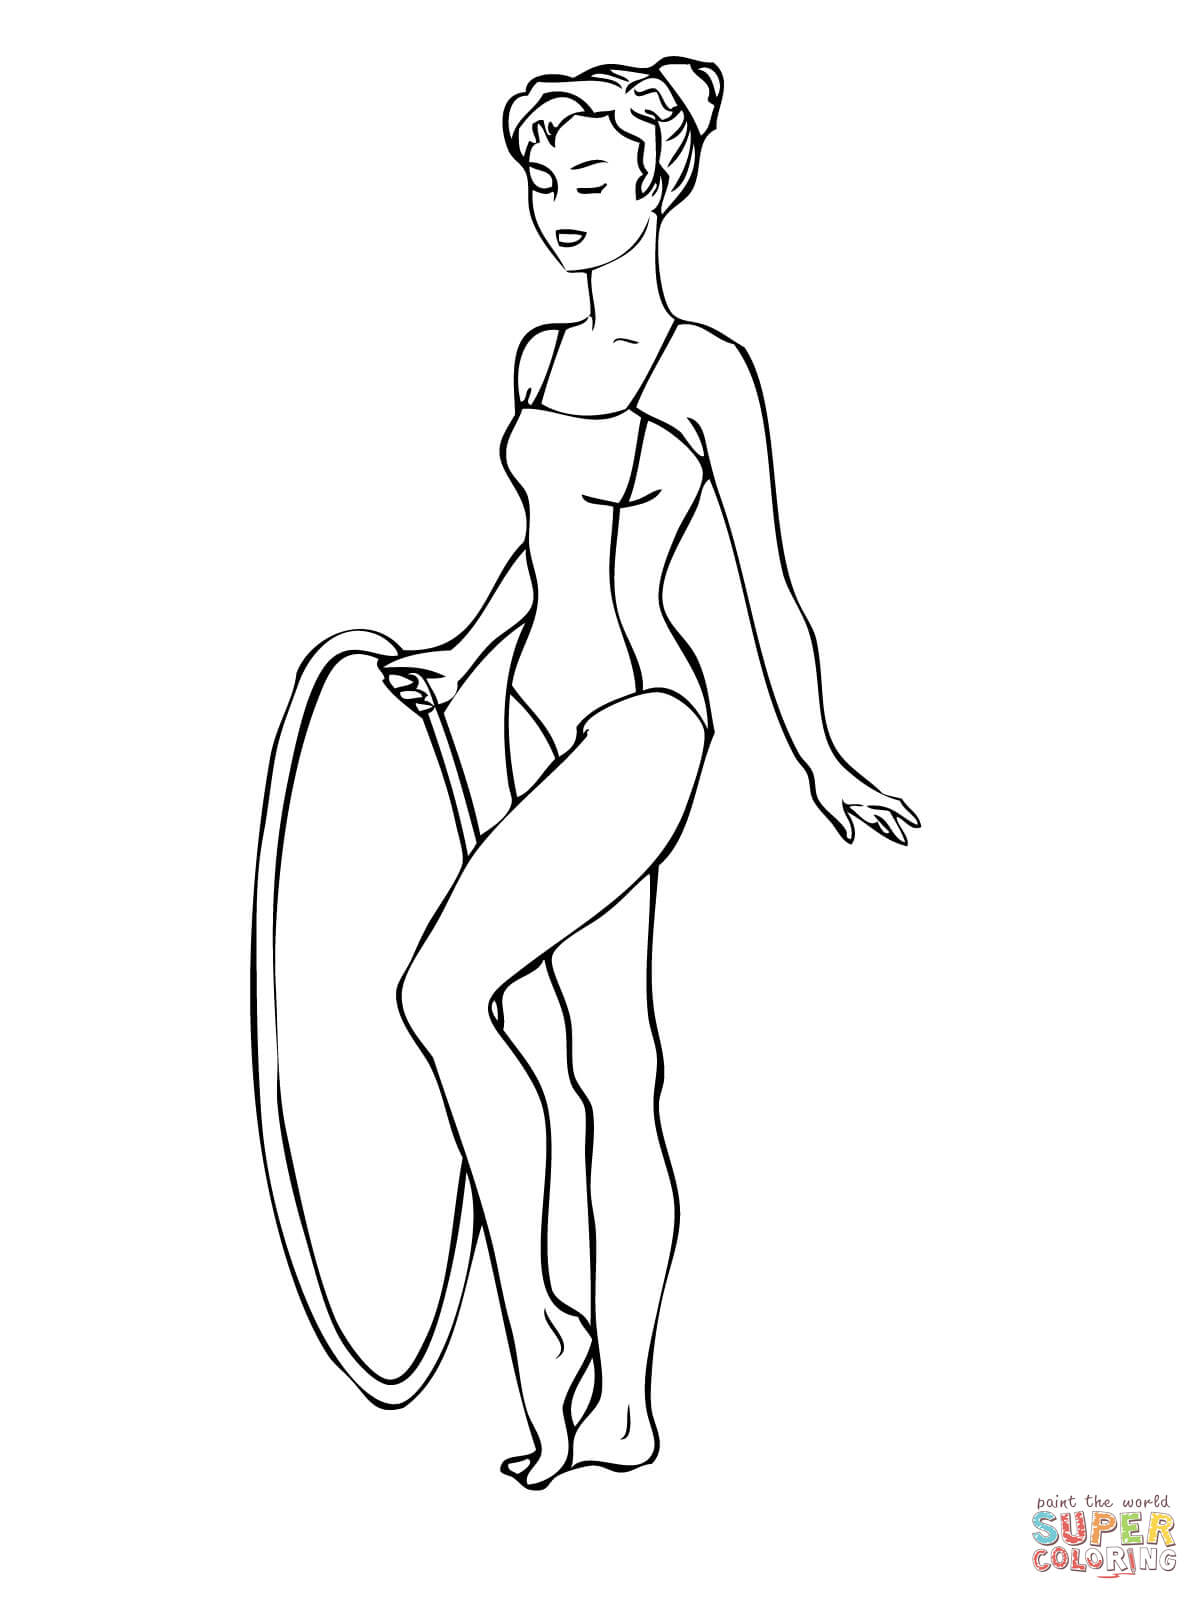 Gymnastics coloring pages | Free Coloring Pages